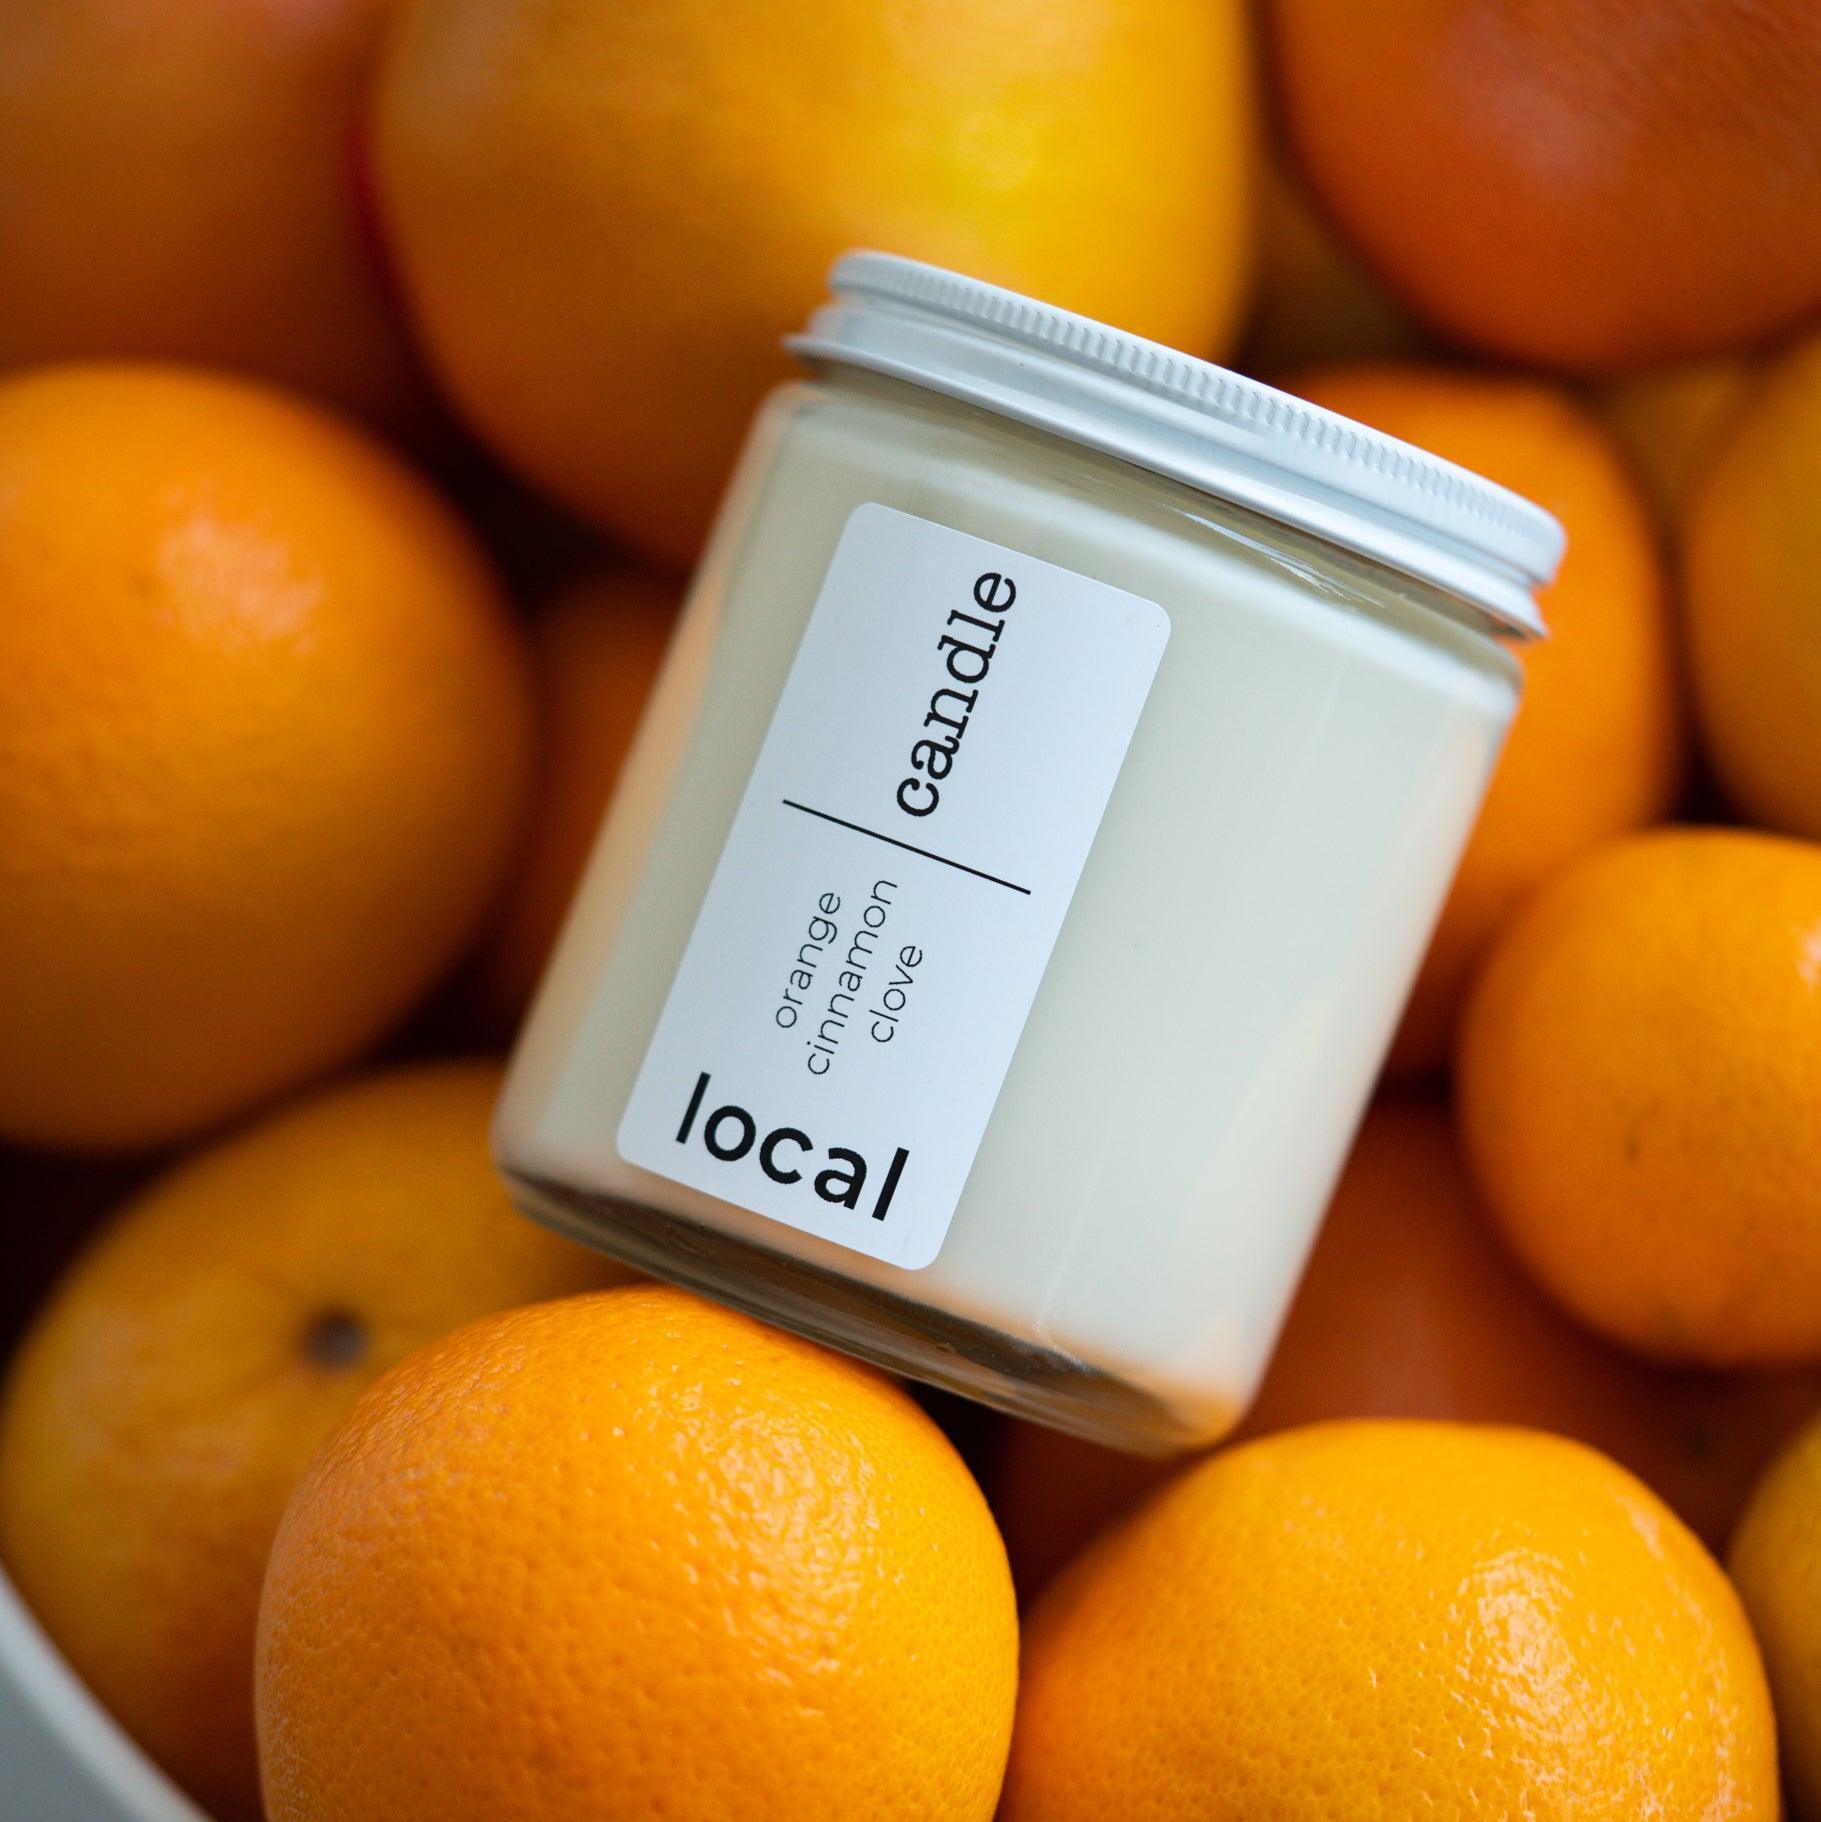 local candle - peppermint - local - letsbelocal.ca